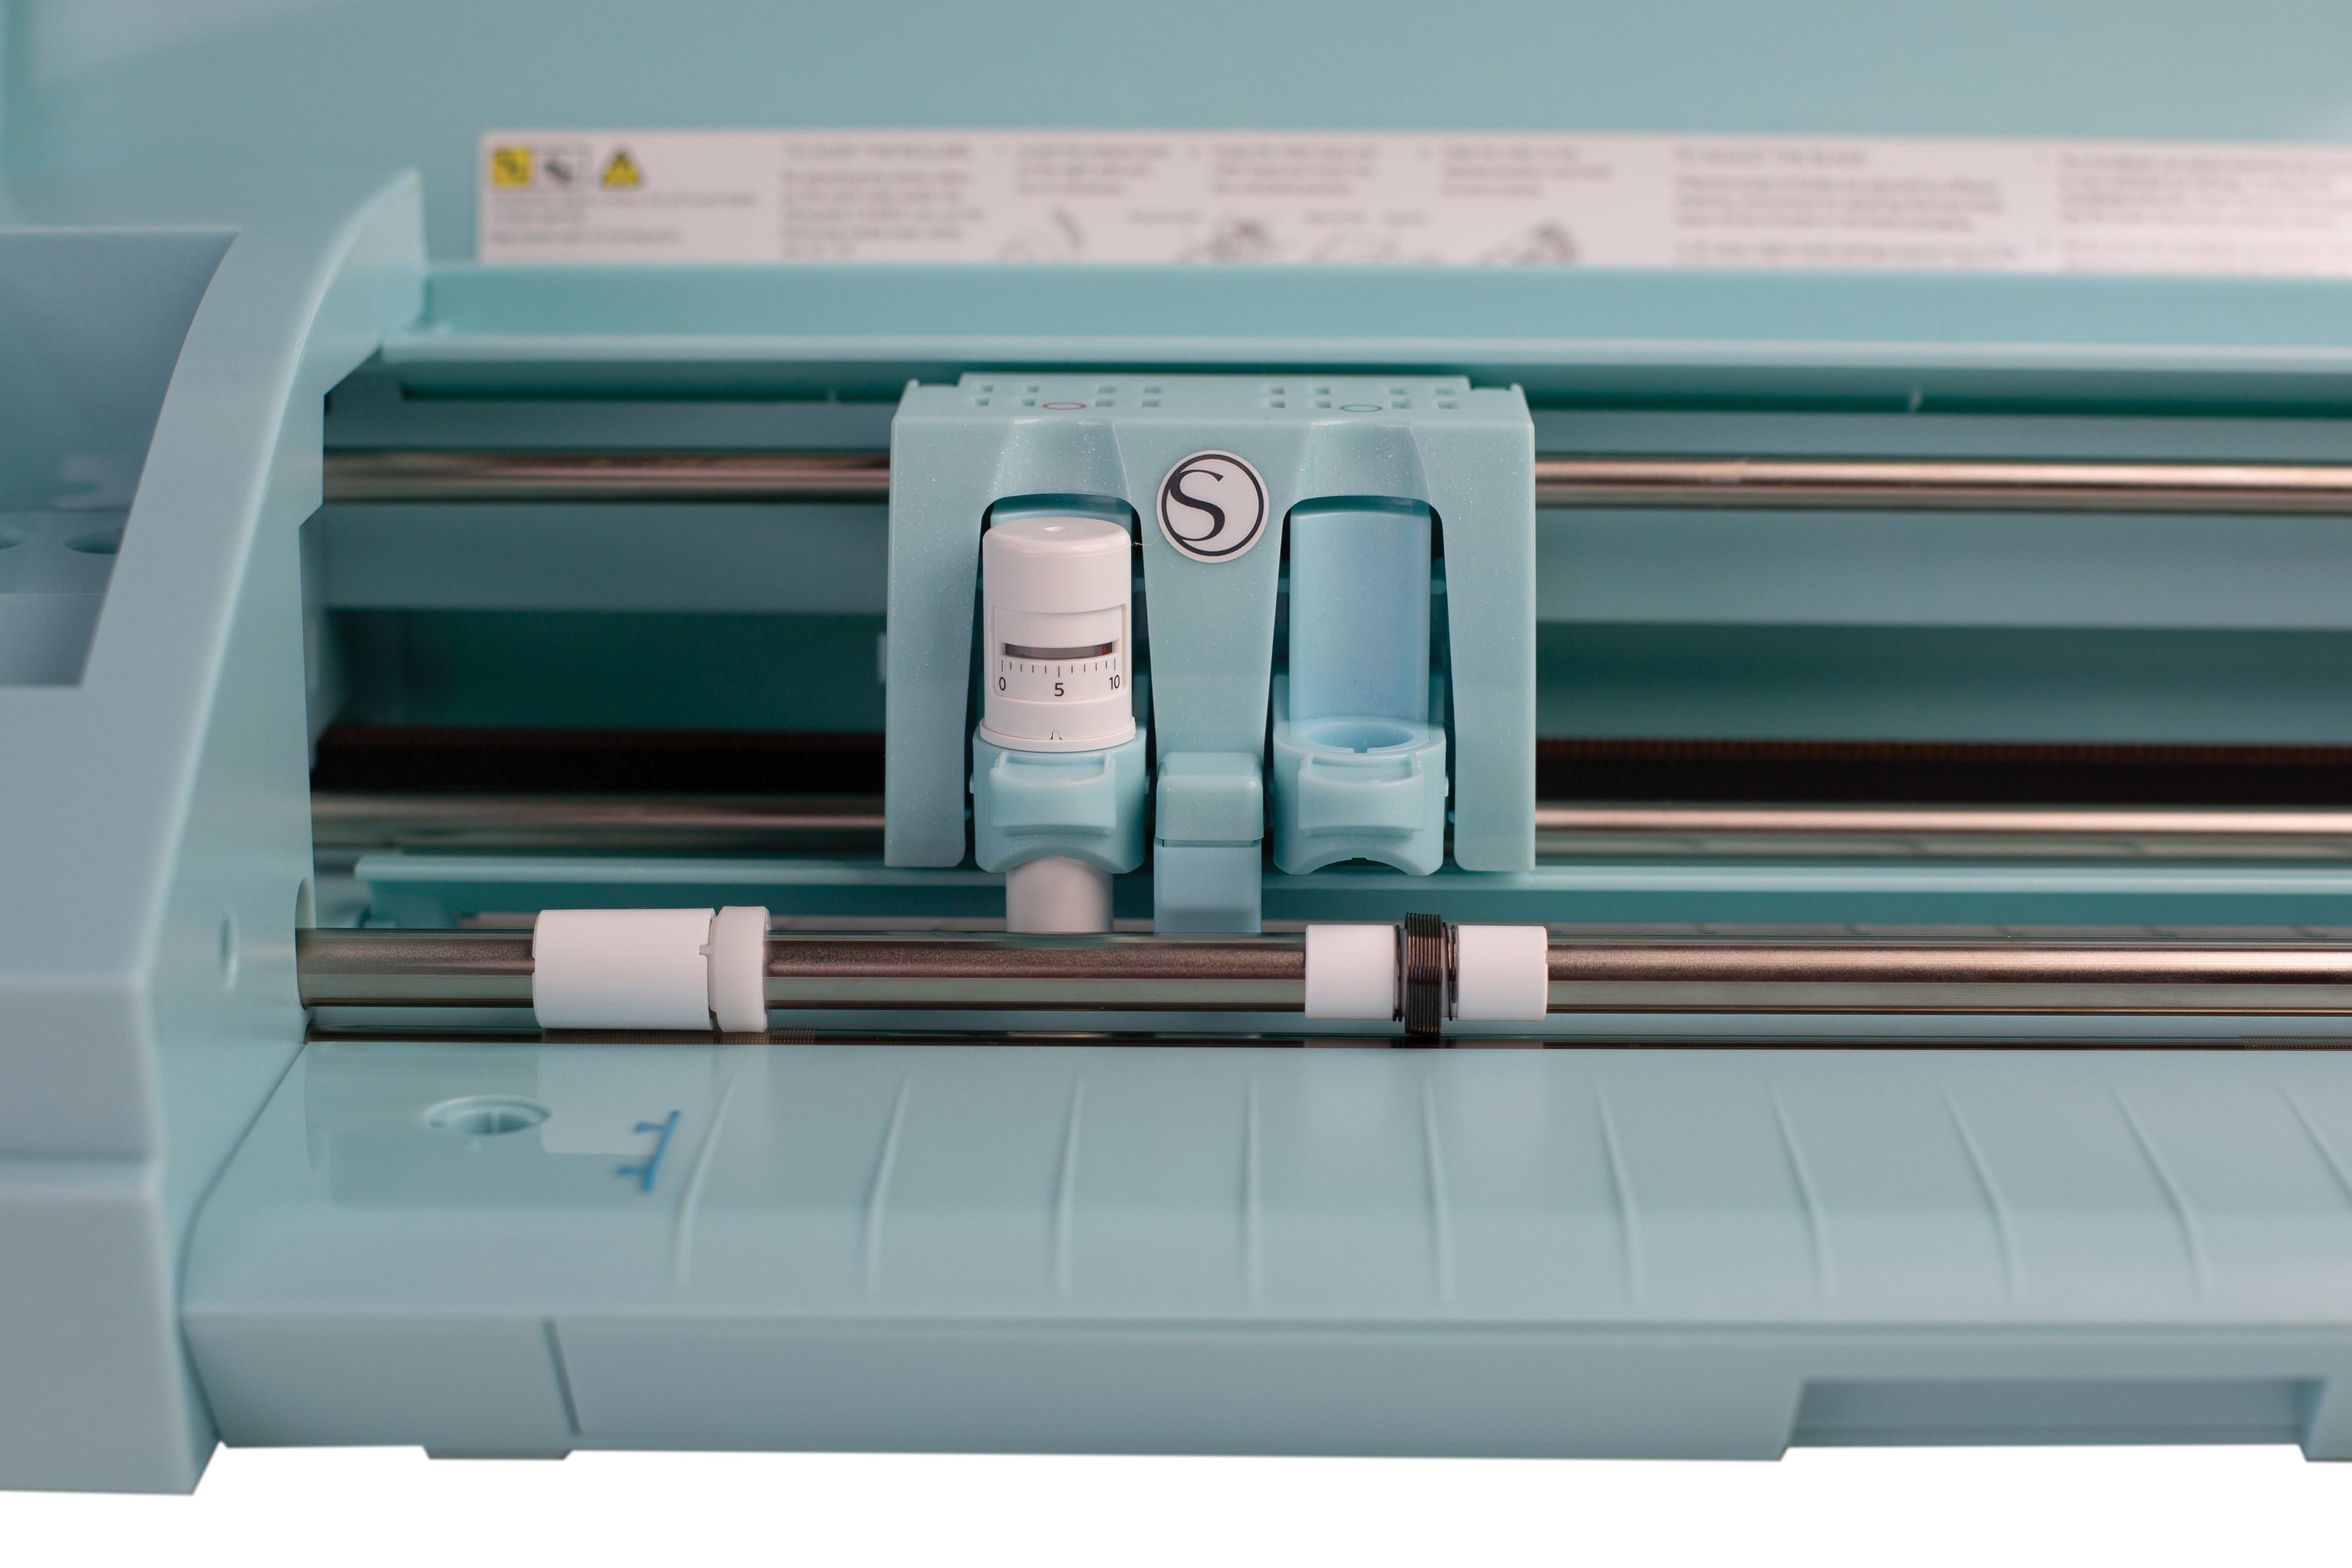 Introducing the Silhouette CAMEO® 3 Desktop Cutting System - Alpha Supply  Company